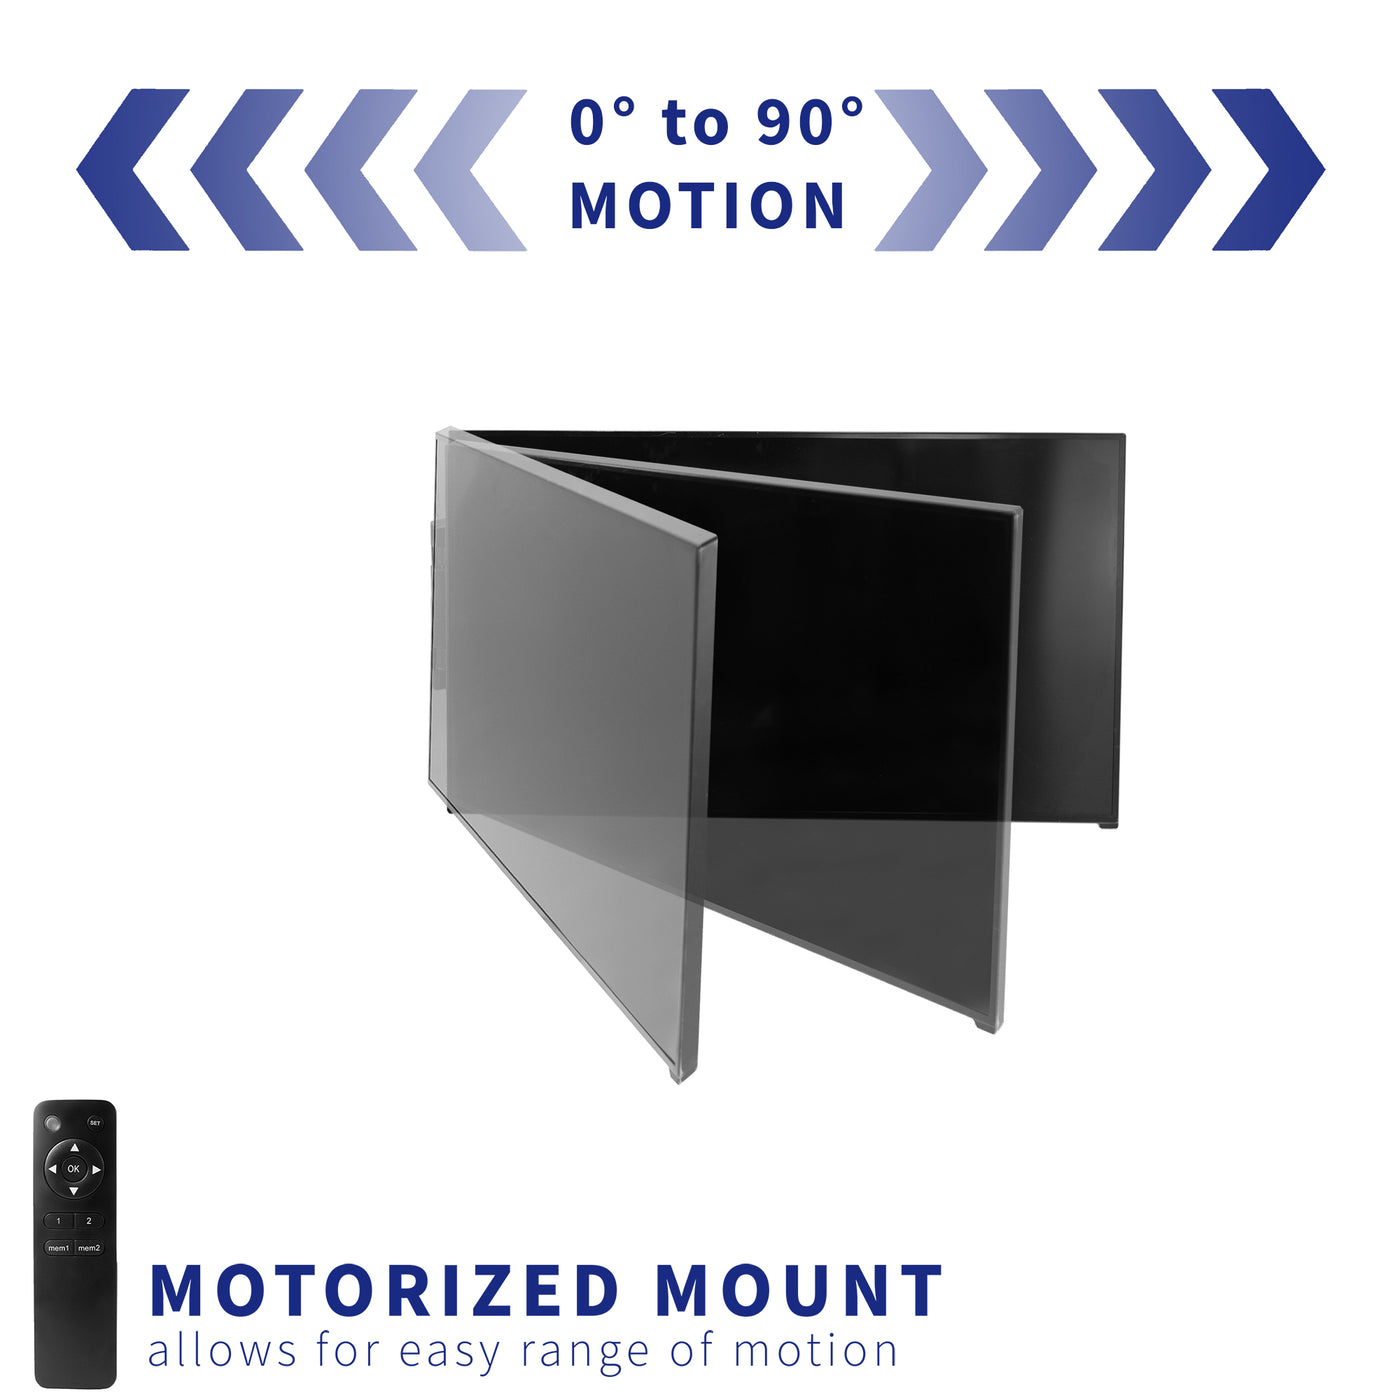 Motorized TV mount with remote control for heavy remote range adjustments.